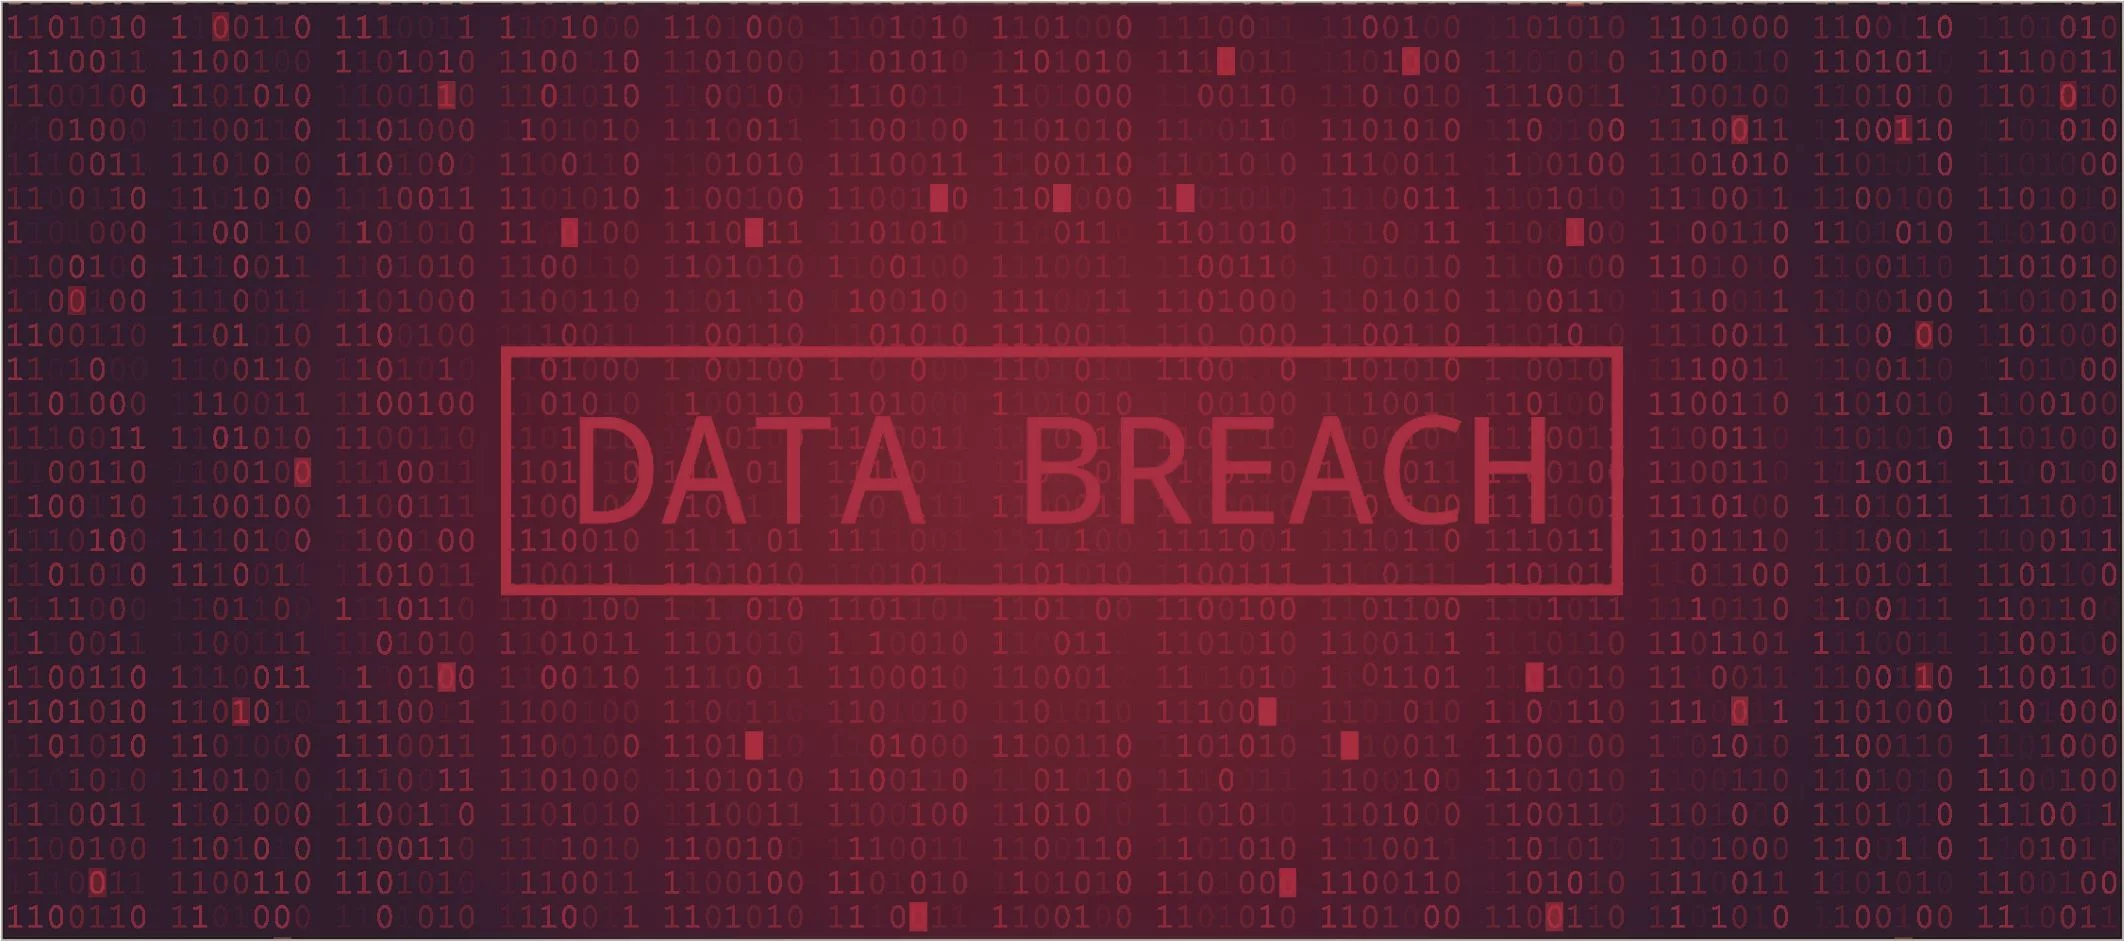 Are your current data security policies enough to protect against breaches?